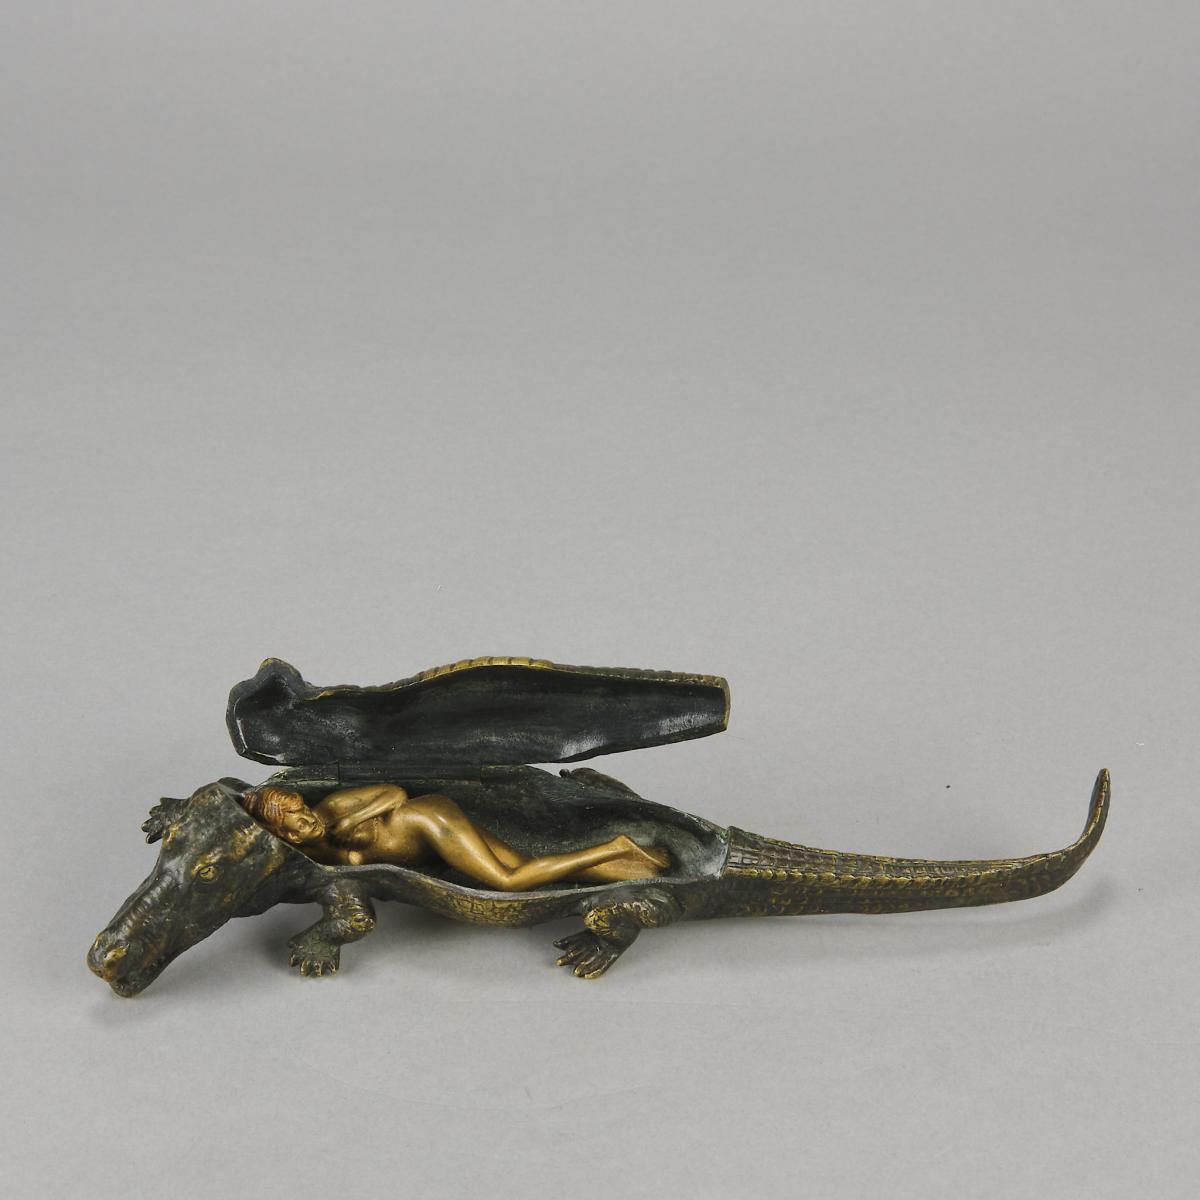 Early 20th Century Cold-Painted Austrian Bronze entitled "Suprise Crocodile" by Franz Bergman